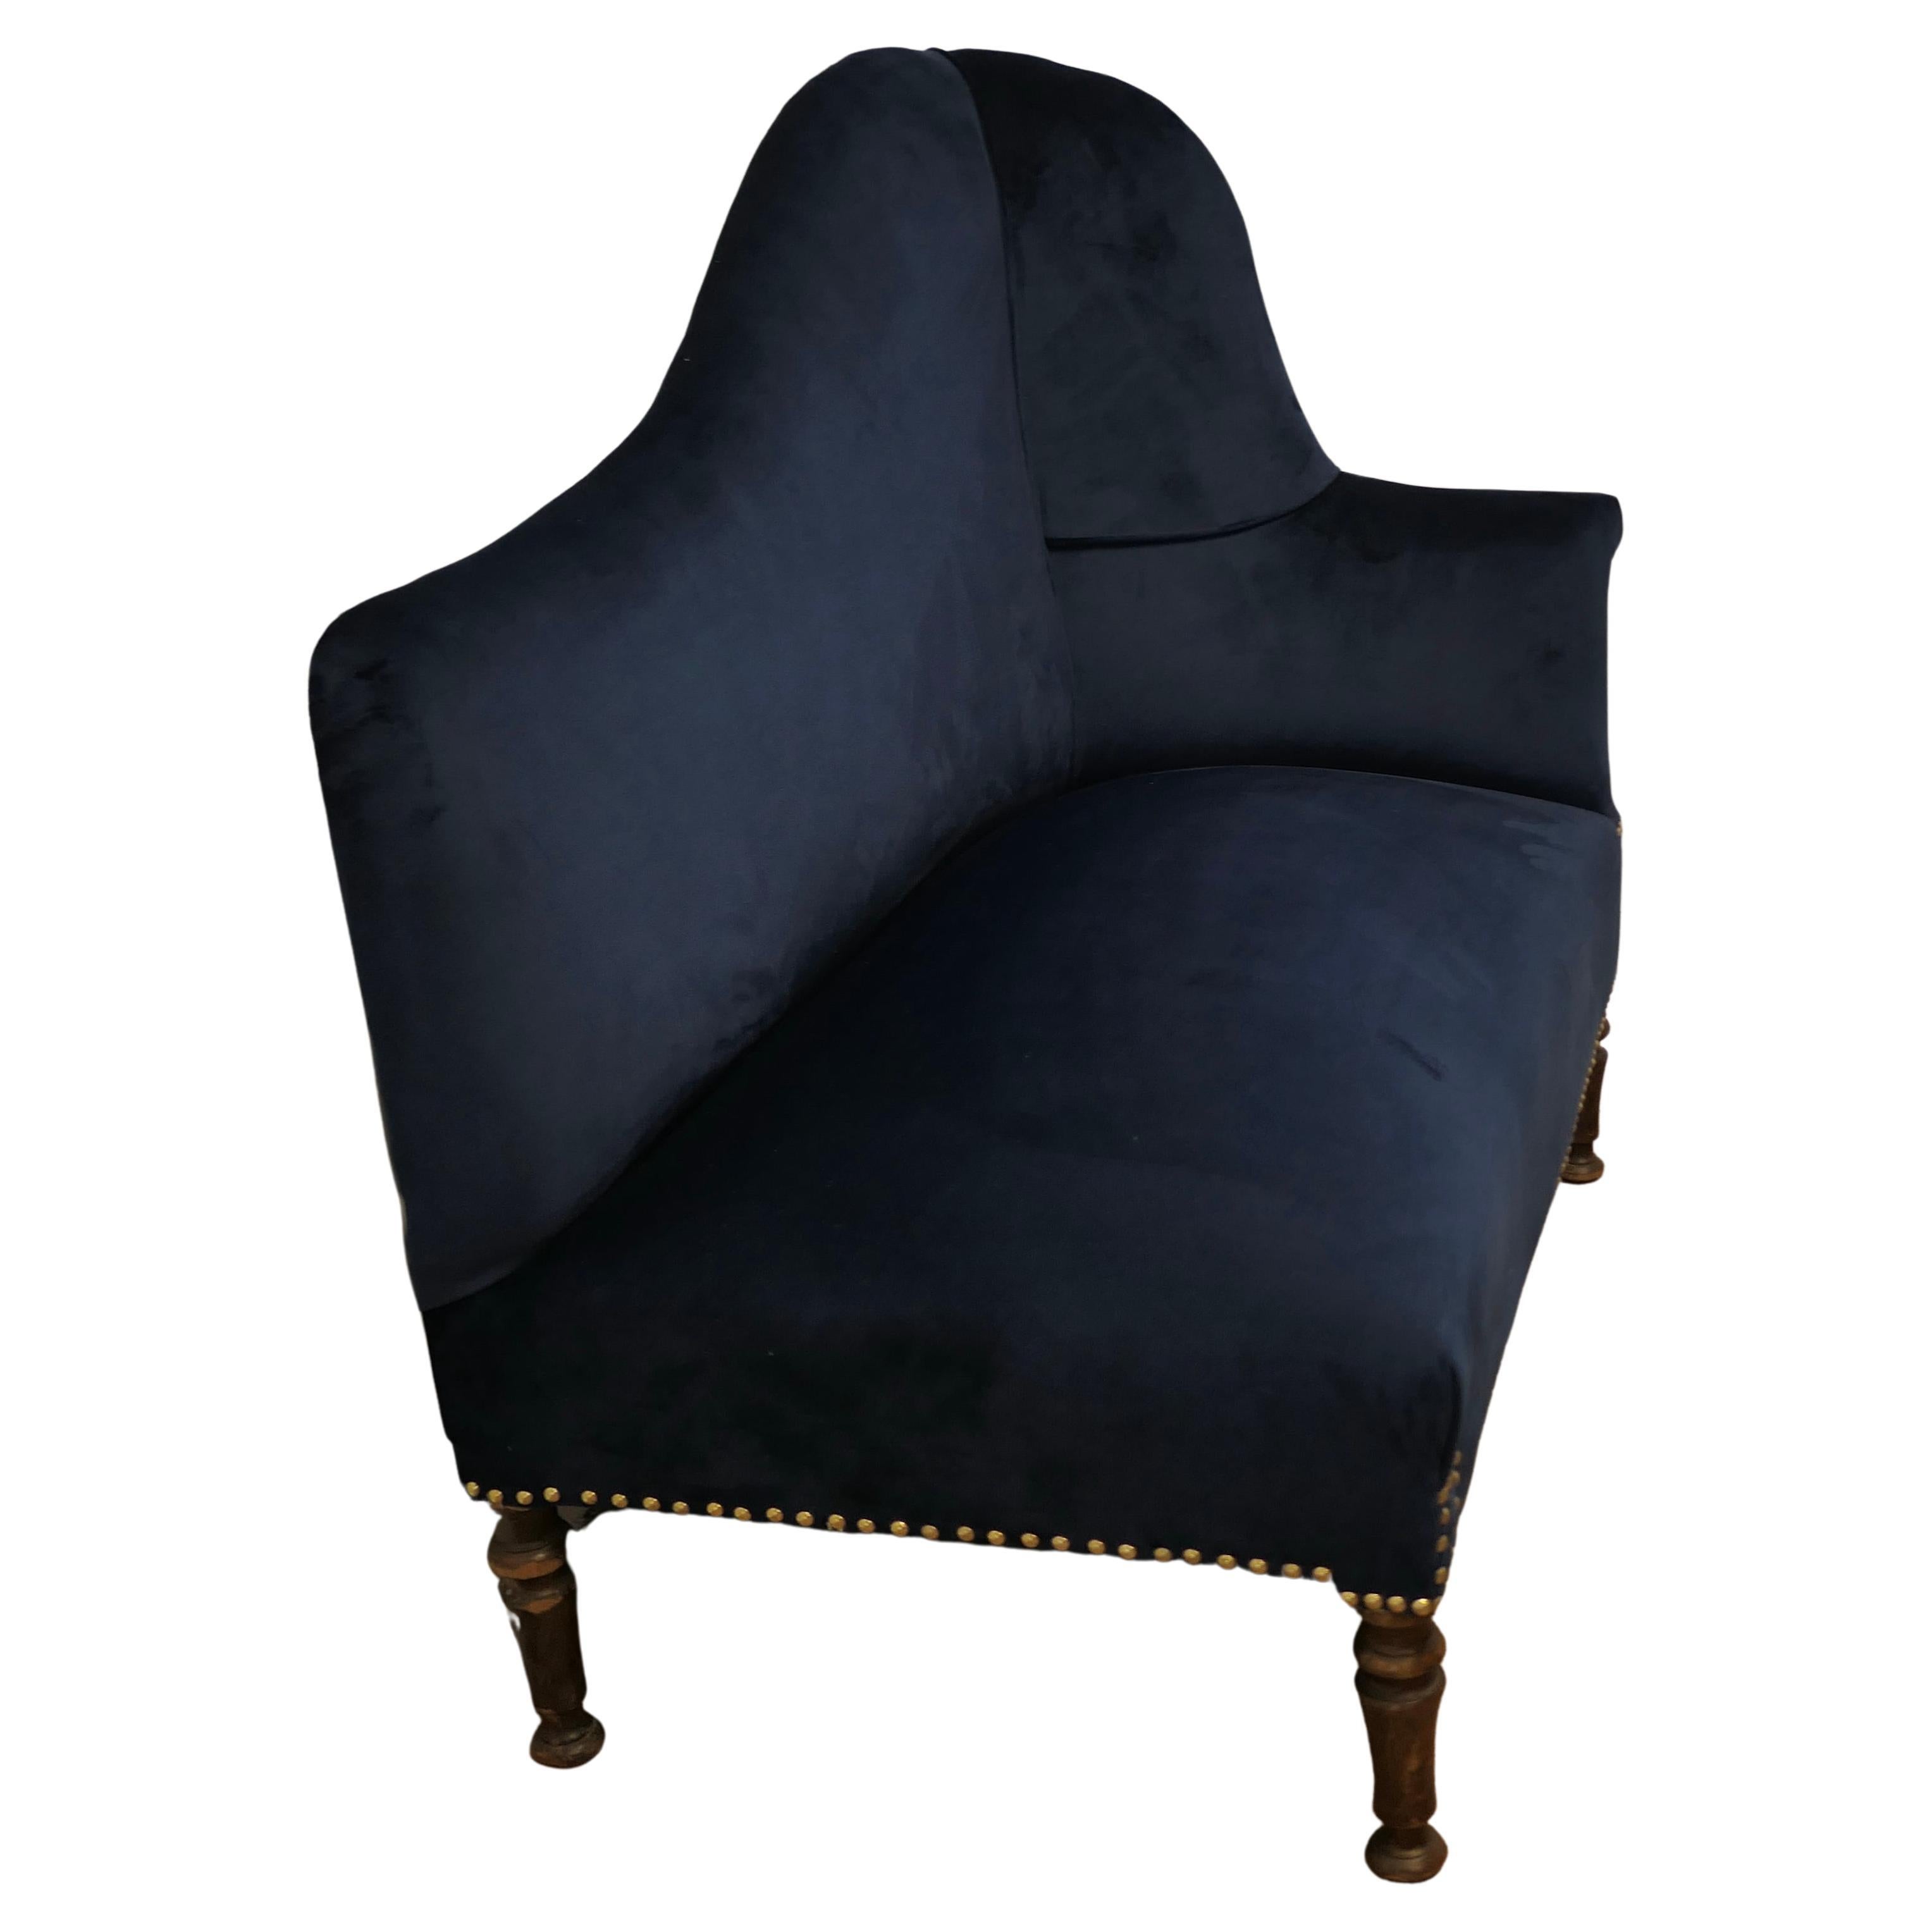 Art Deco Regency Style Hall Seat or Salon Chaise

This delightful little seat stands on sturdy turned legs, it is upholstered in deep pile Velvet with gold studs
The seat is good and sound condition the upholstery is in very good condition
The